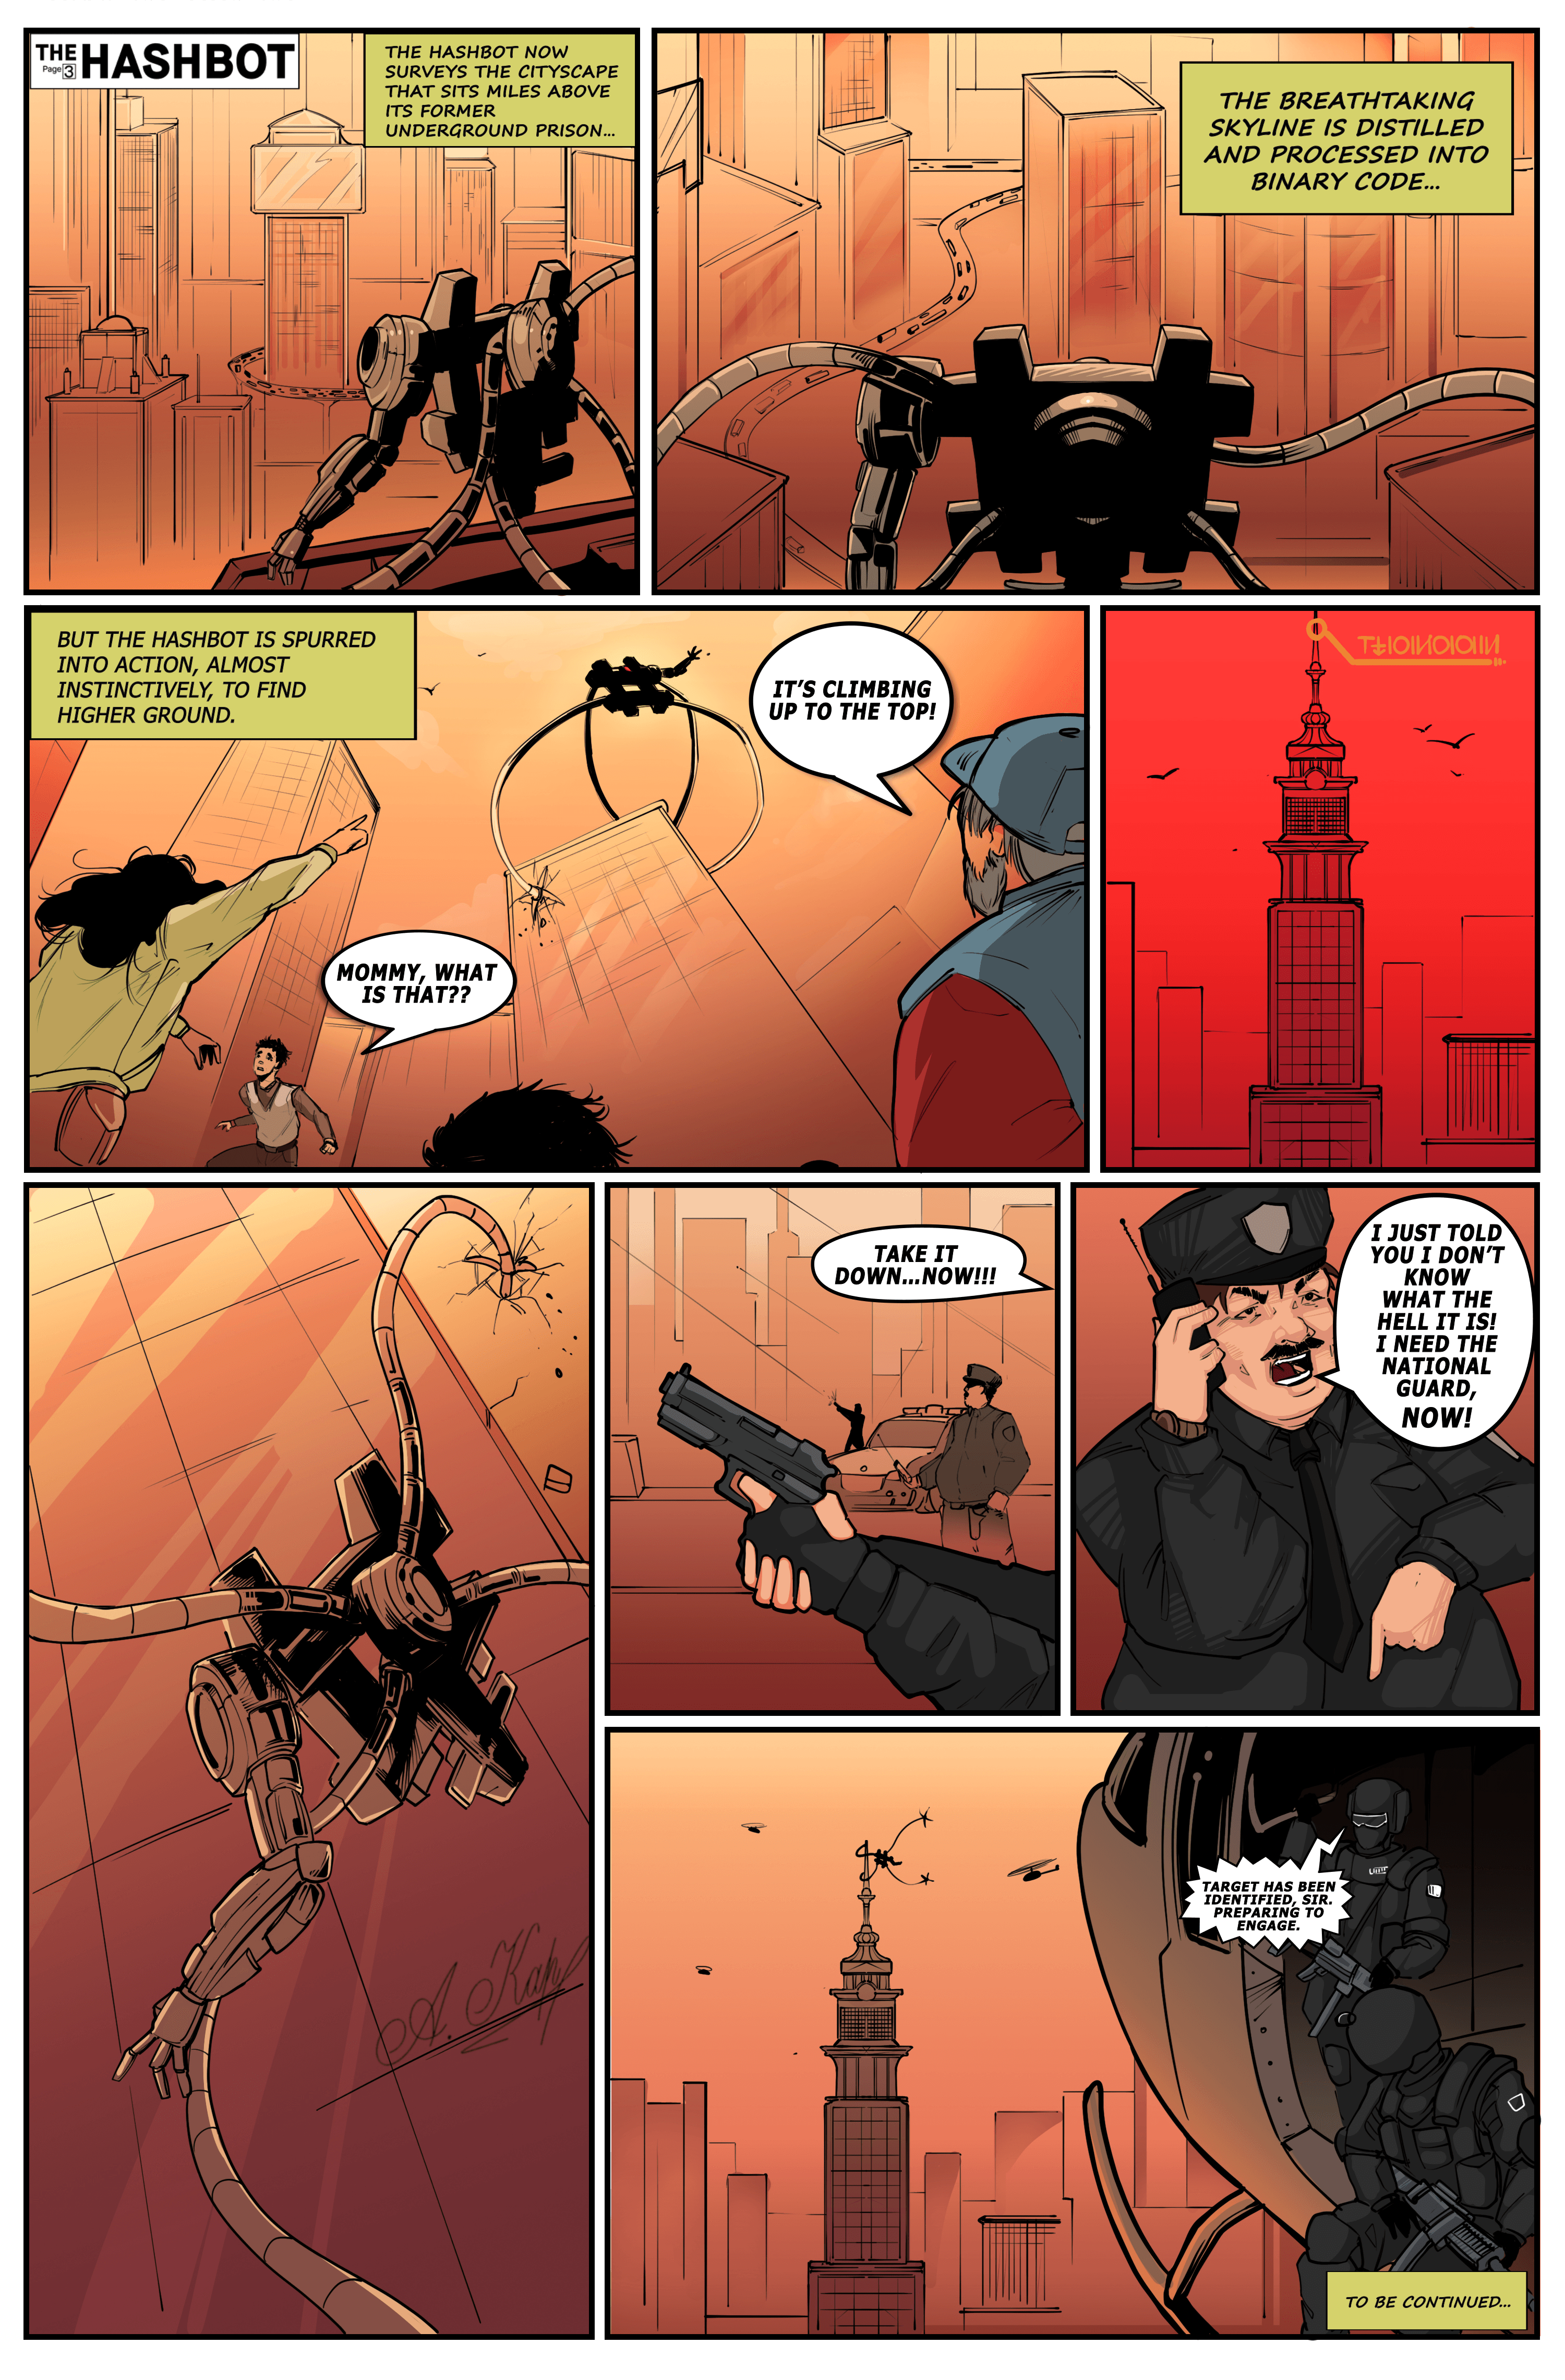 The Hashbot #1 Page 3